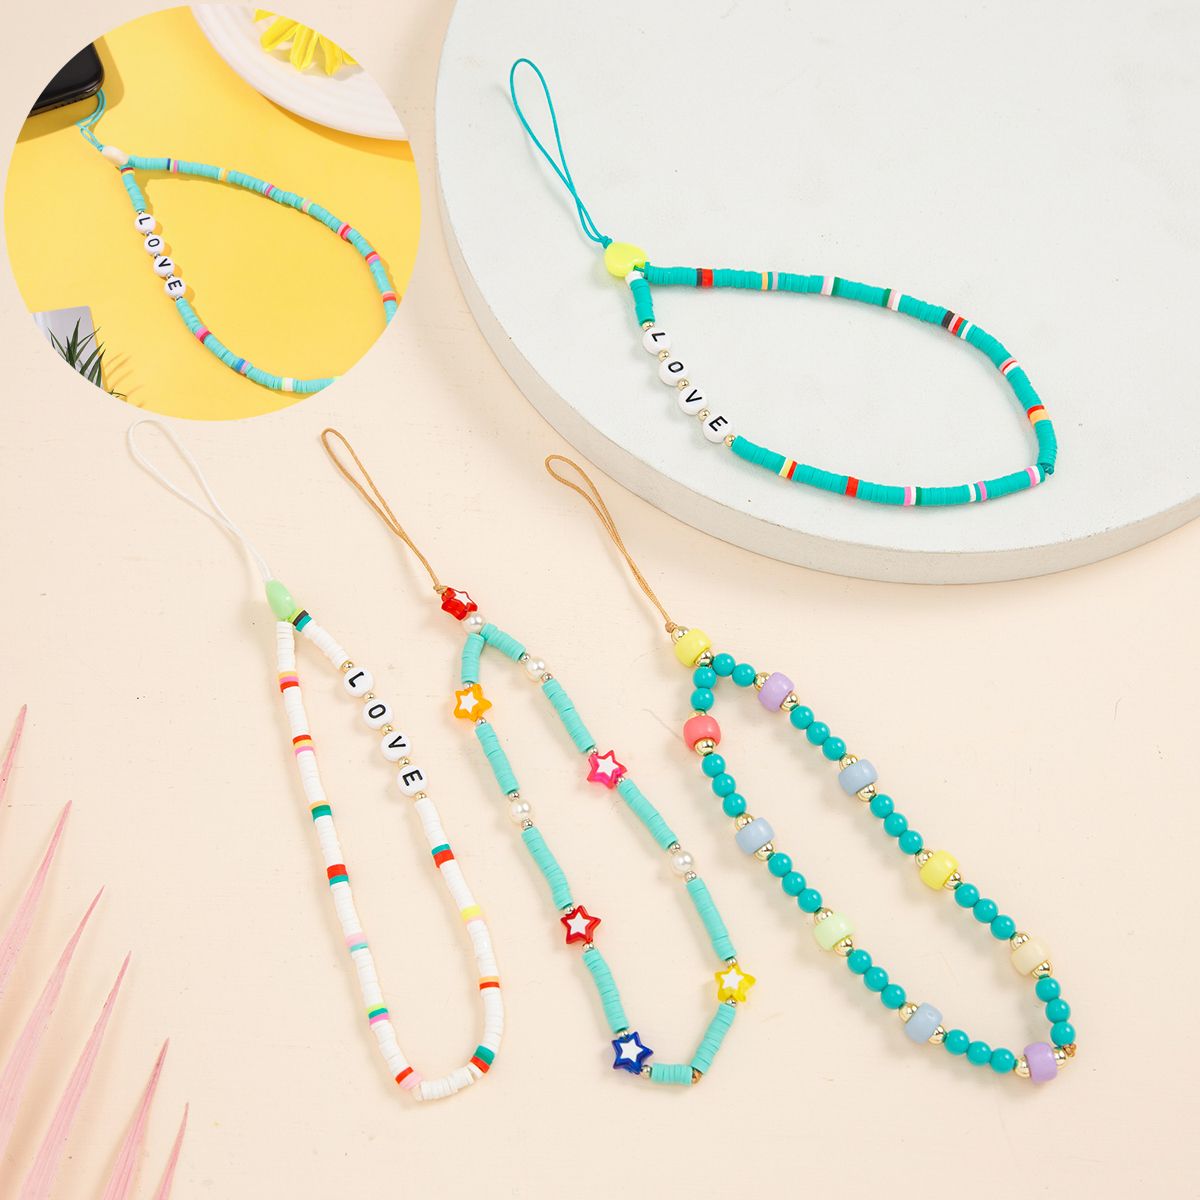 NQMODL SHOP New Colorful Anti-Lost Acrylic Bead Mobile Phone Strap Lanyard Soft Pottery Rope Phone Chain Cell Phone Case Hanging Cord